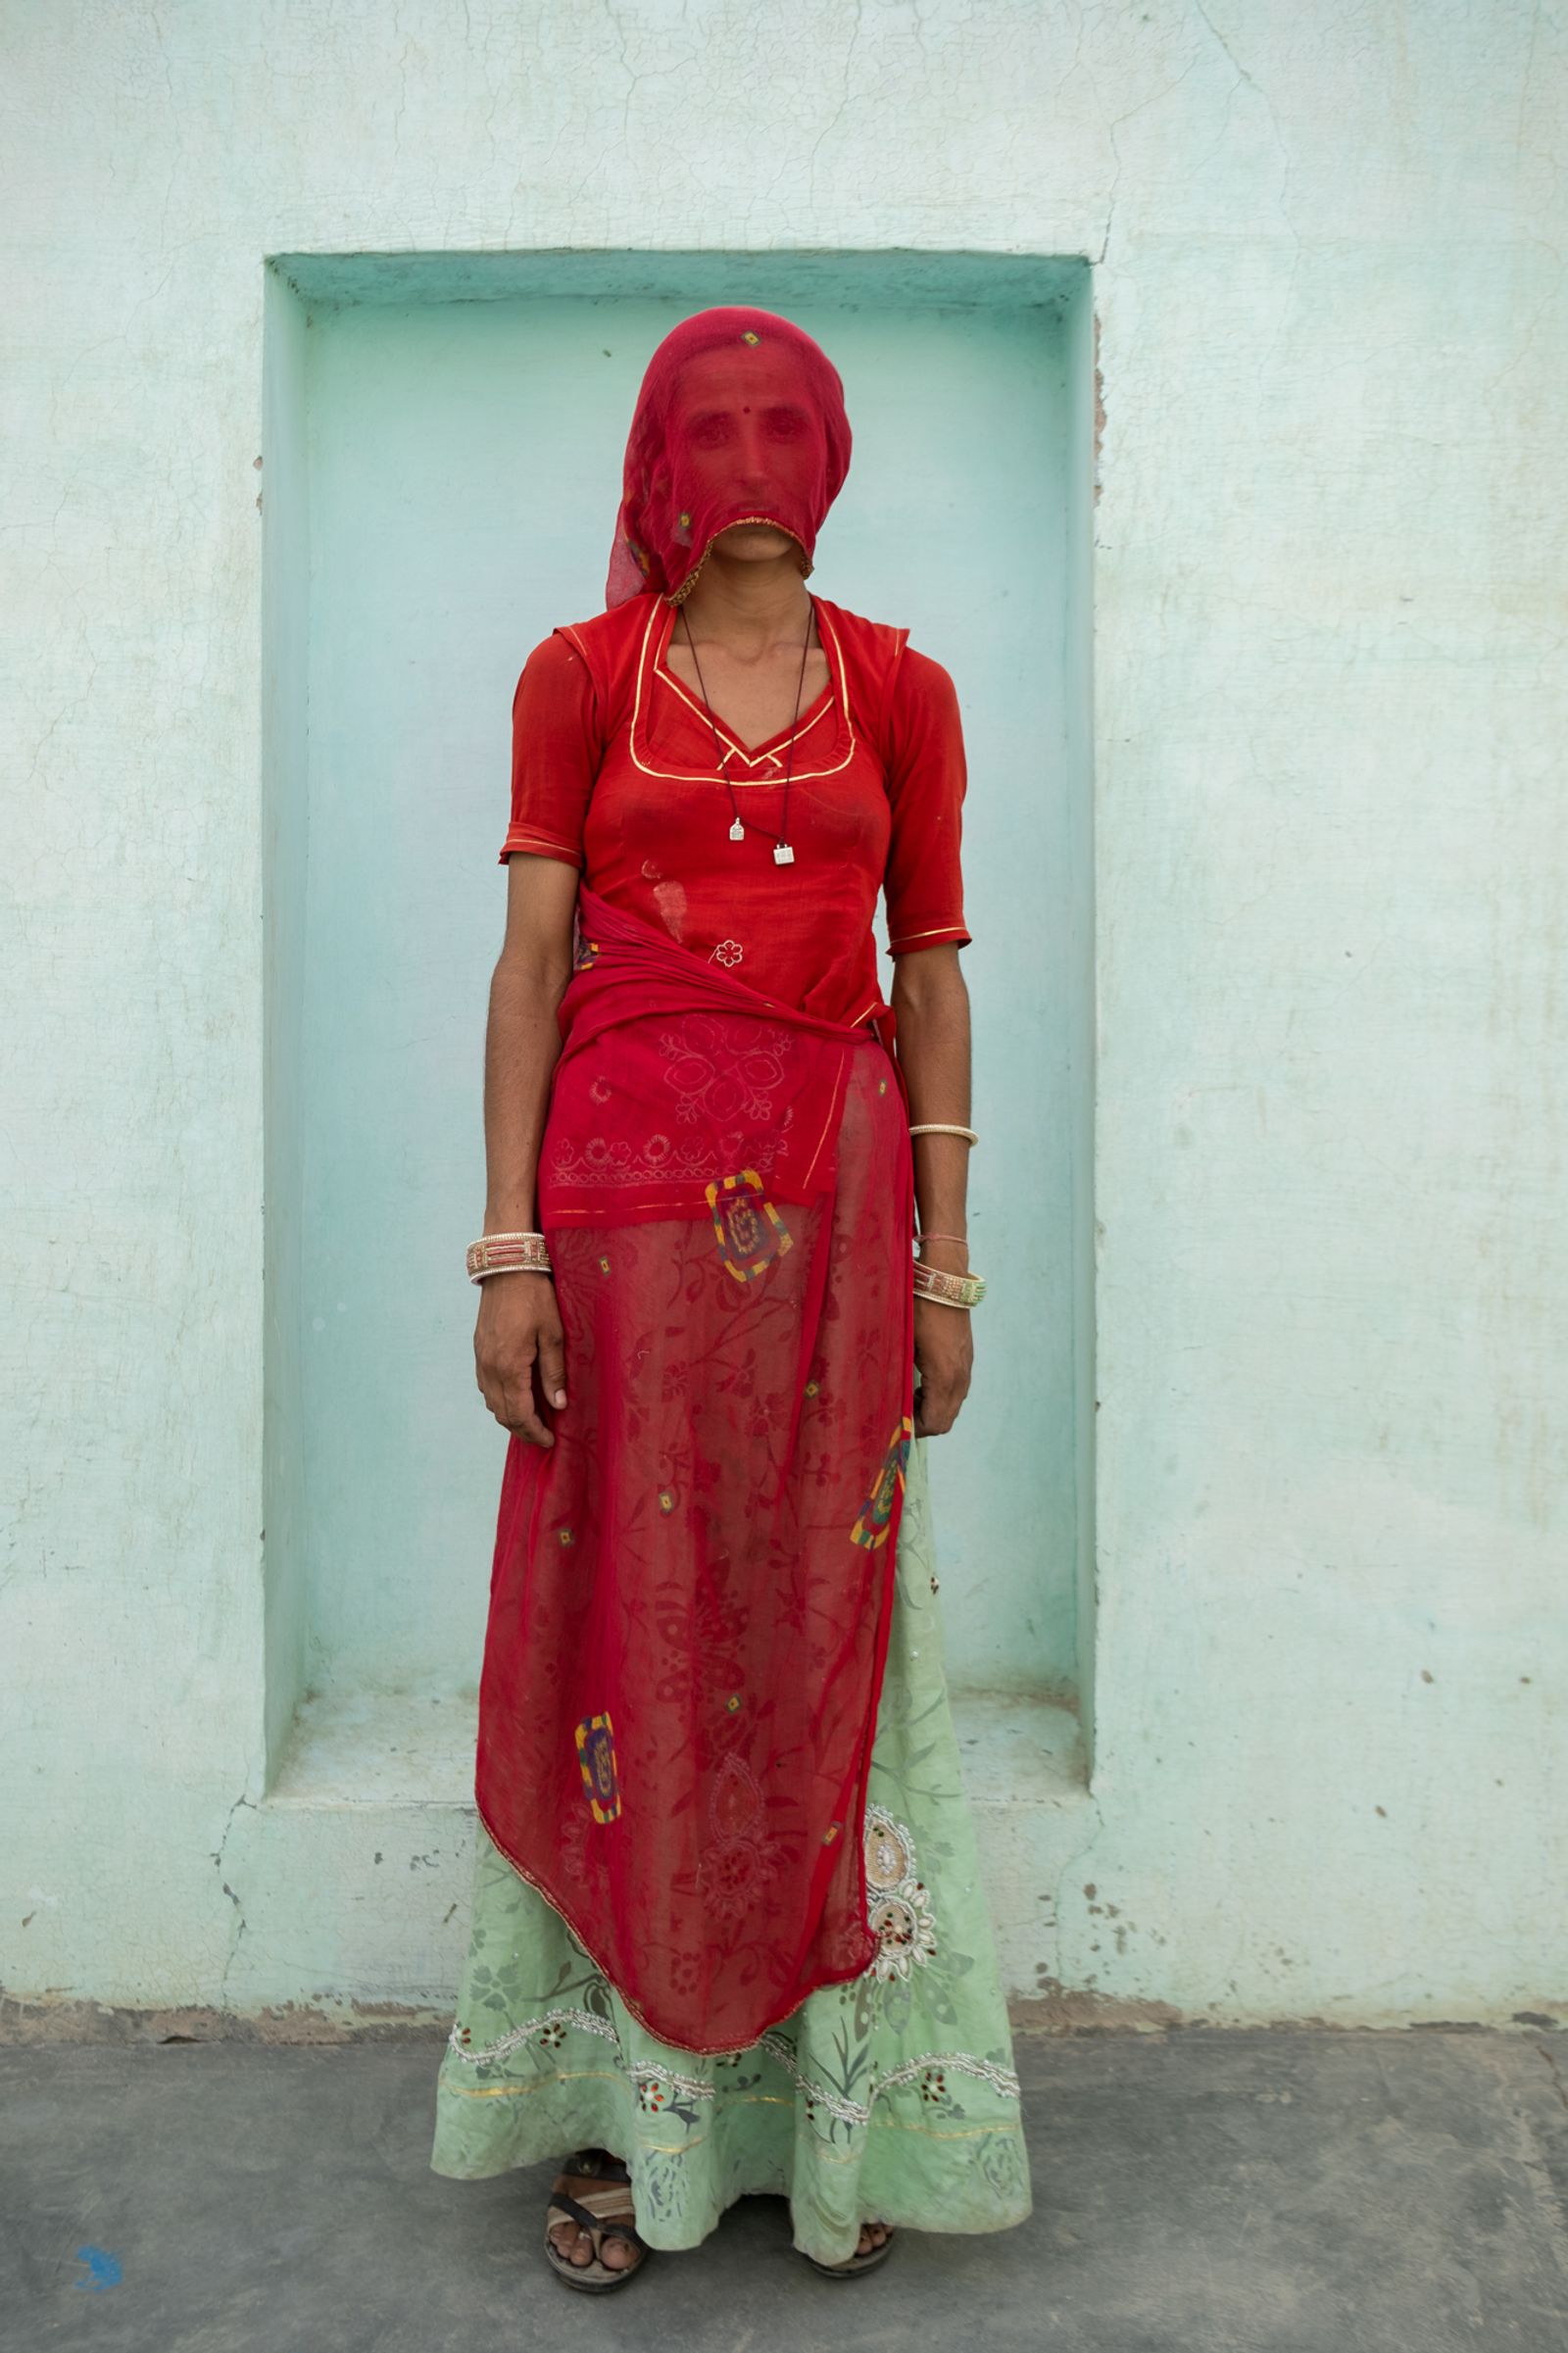 © Ankita Jain - Image from the The invisible me photography project